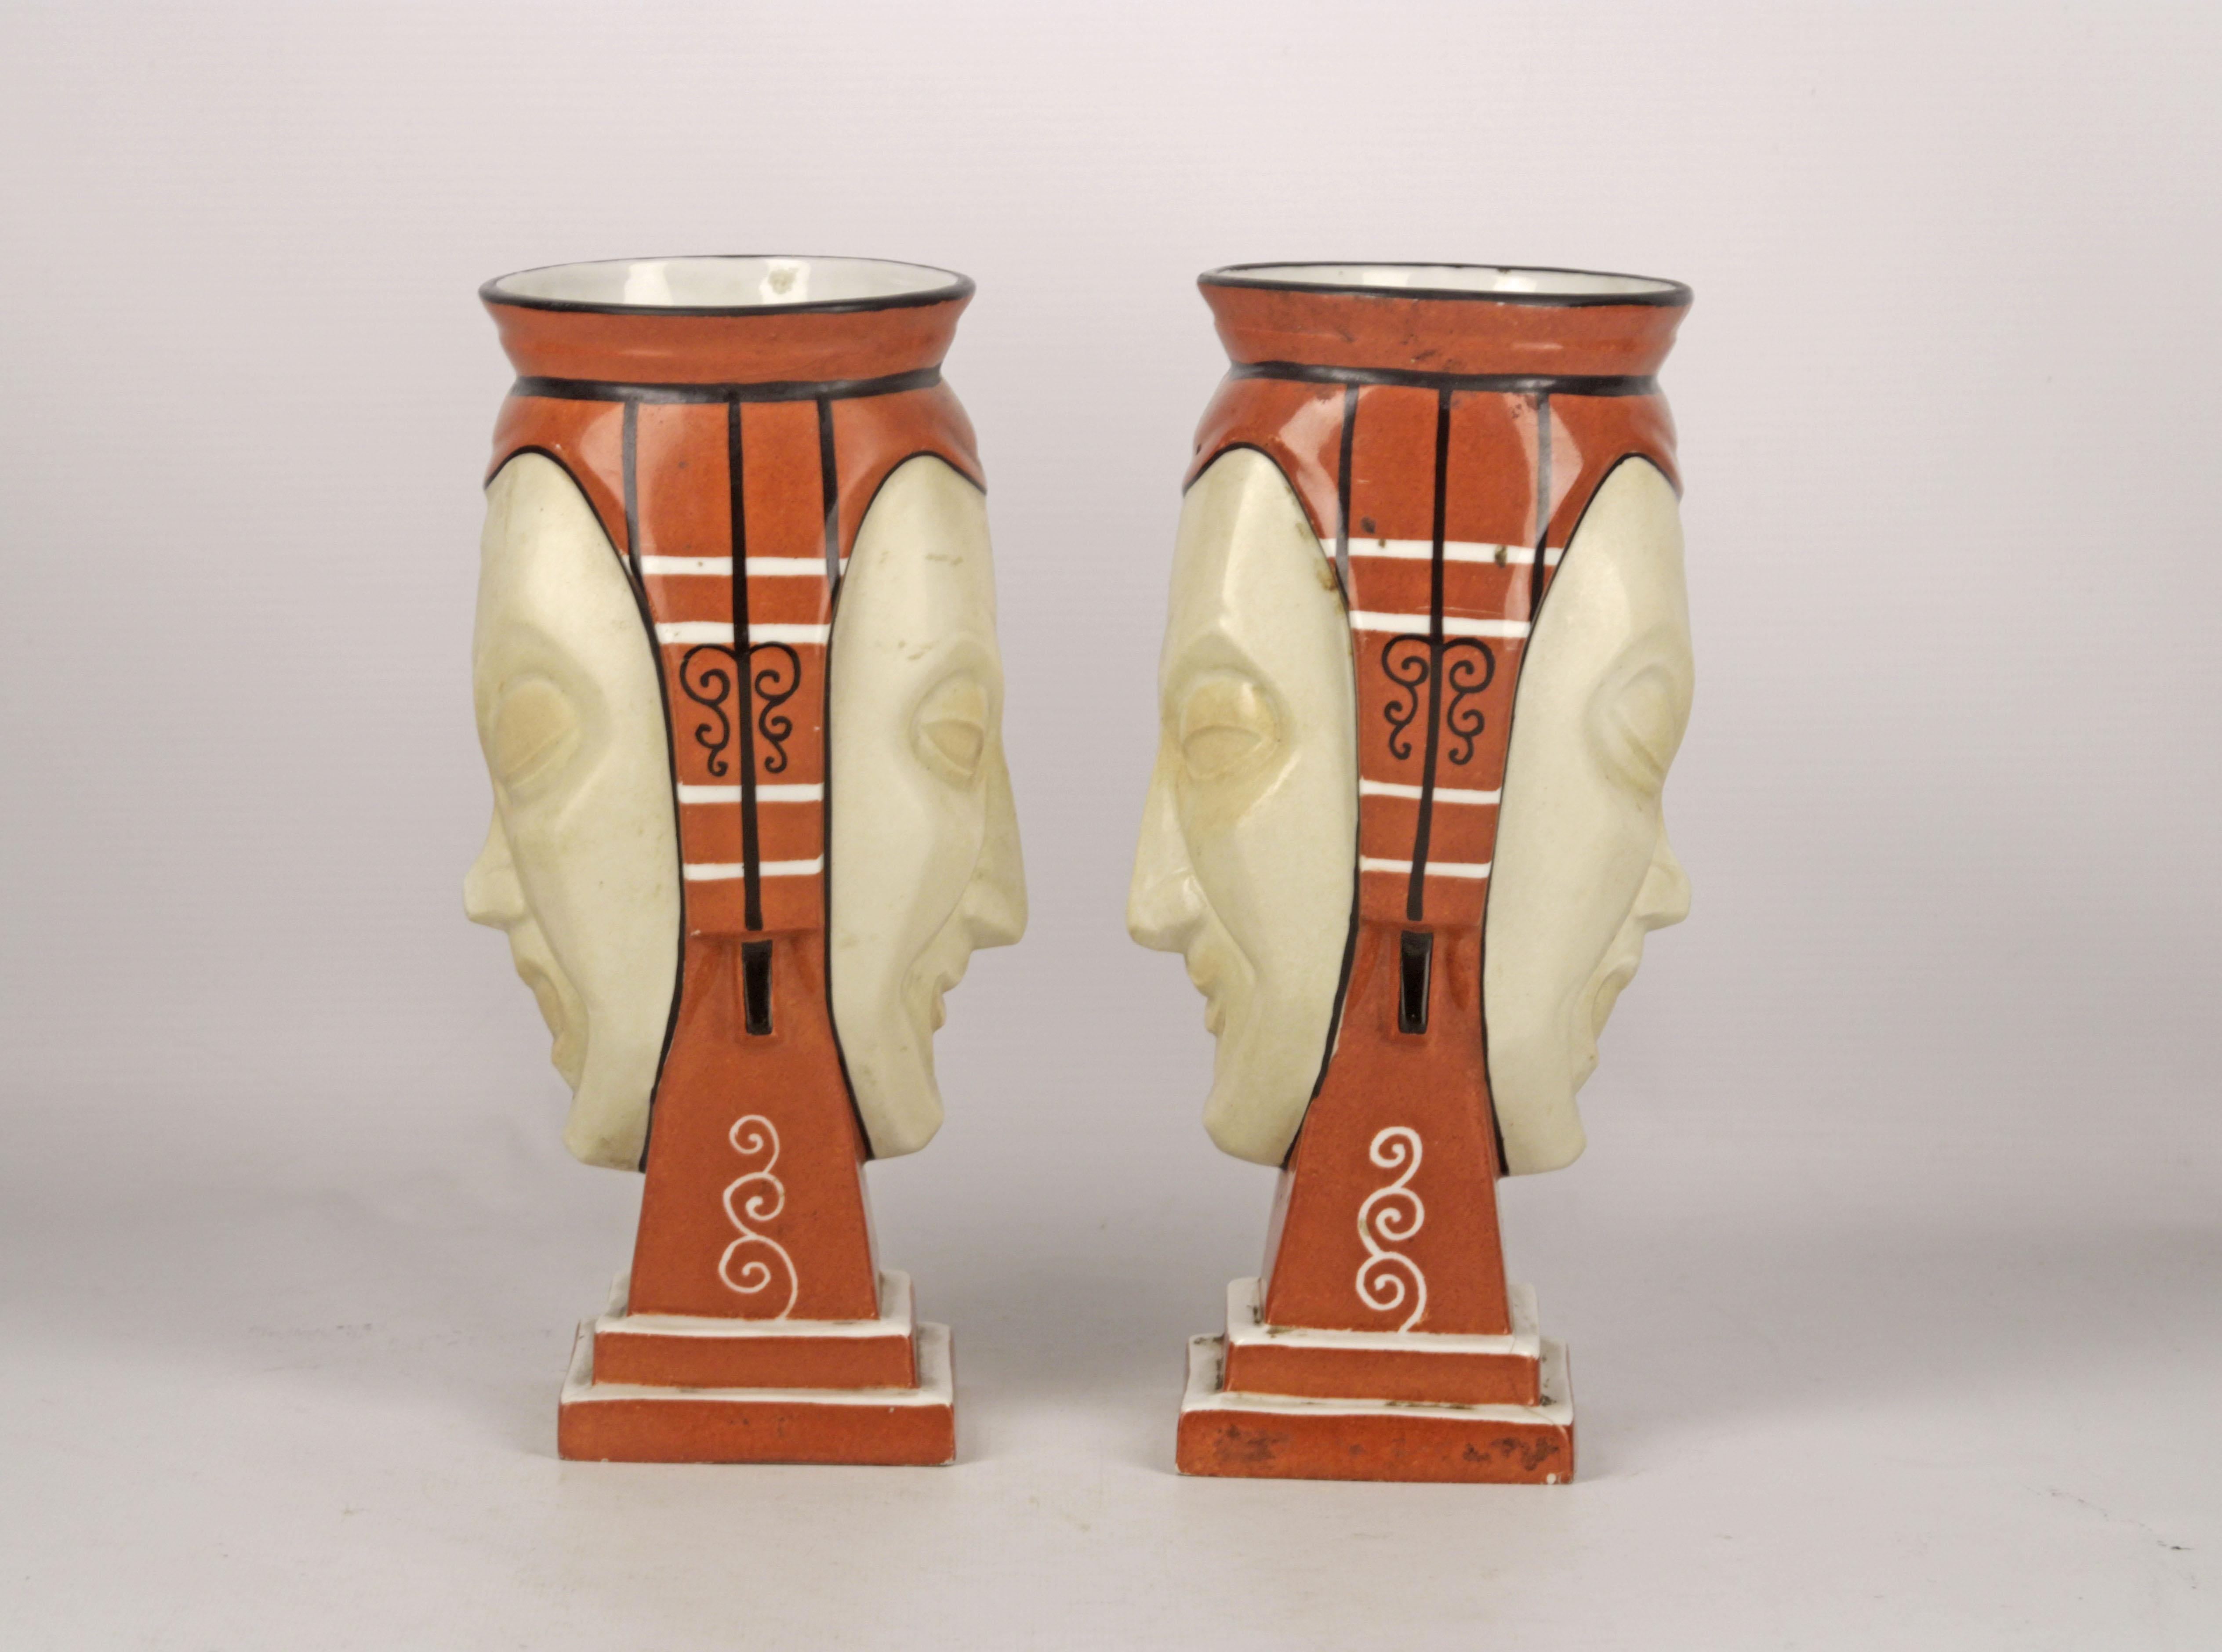 Pair of French Vases Made of Porcelain Representing Two Faces Signed by Aladin In Good Condition For Sale In North Miami, FL